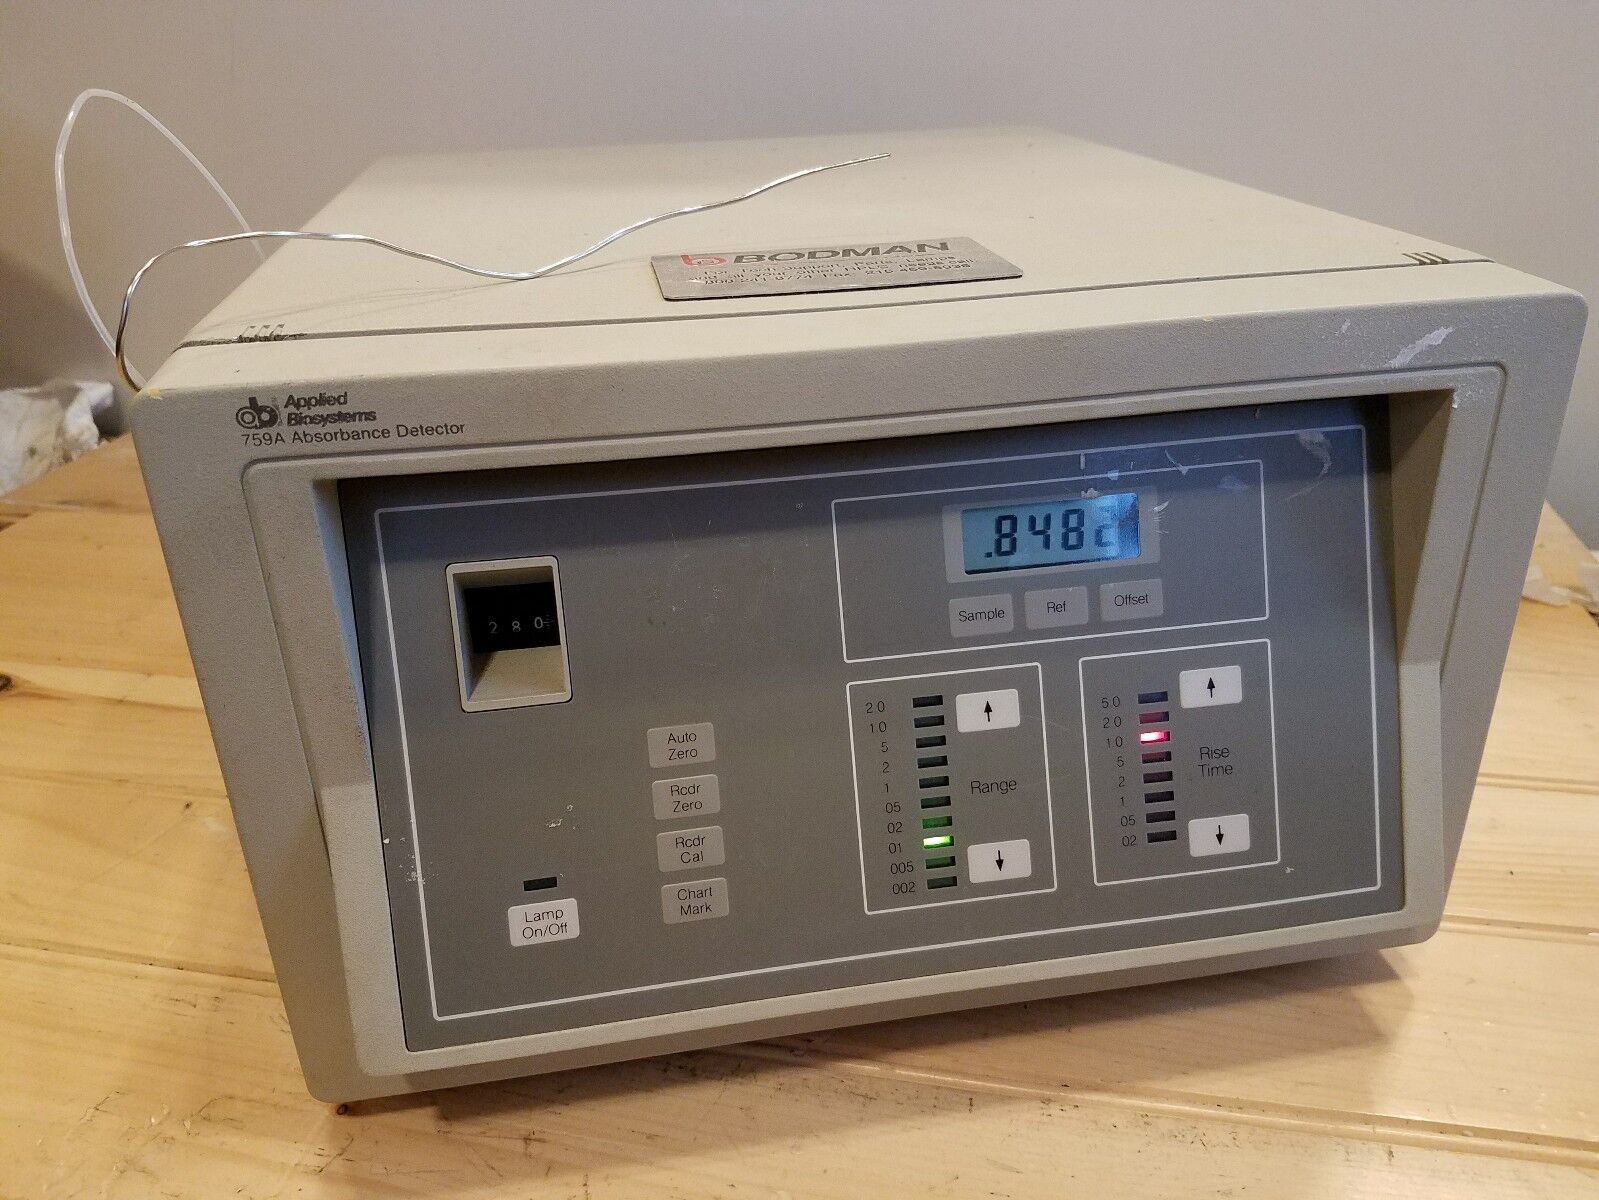 Applied Biosystems 759A Absorbance Detector, HPLC